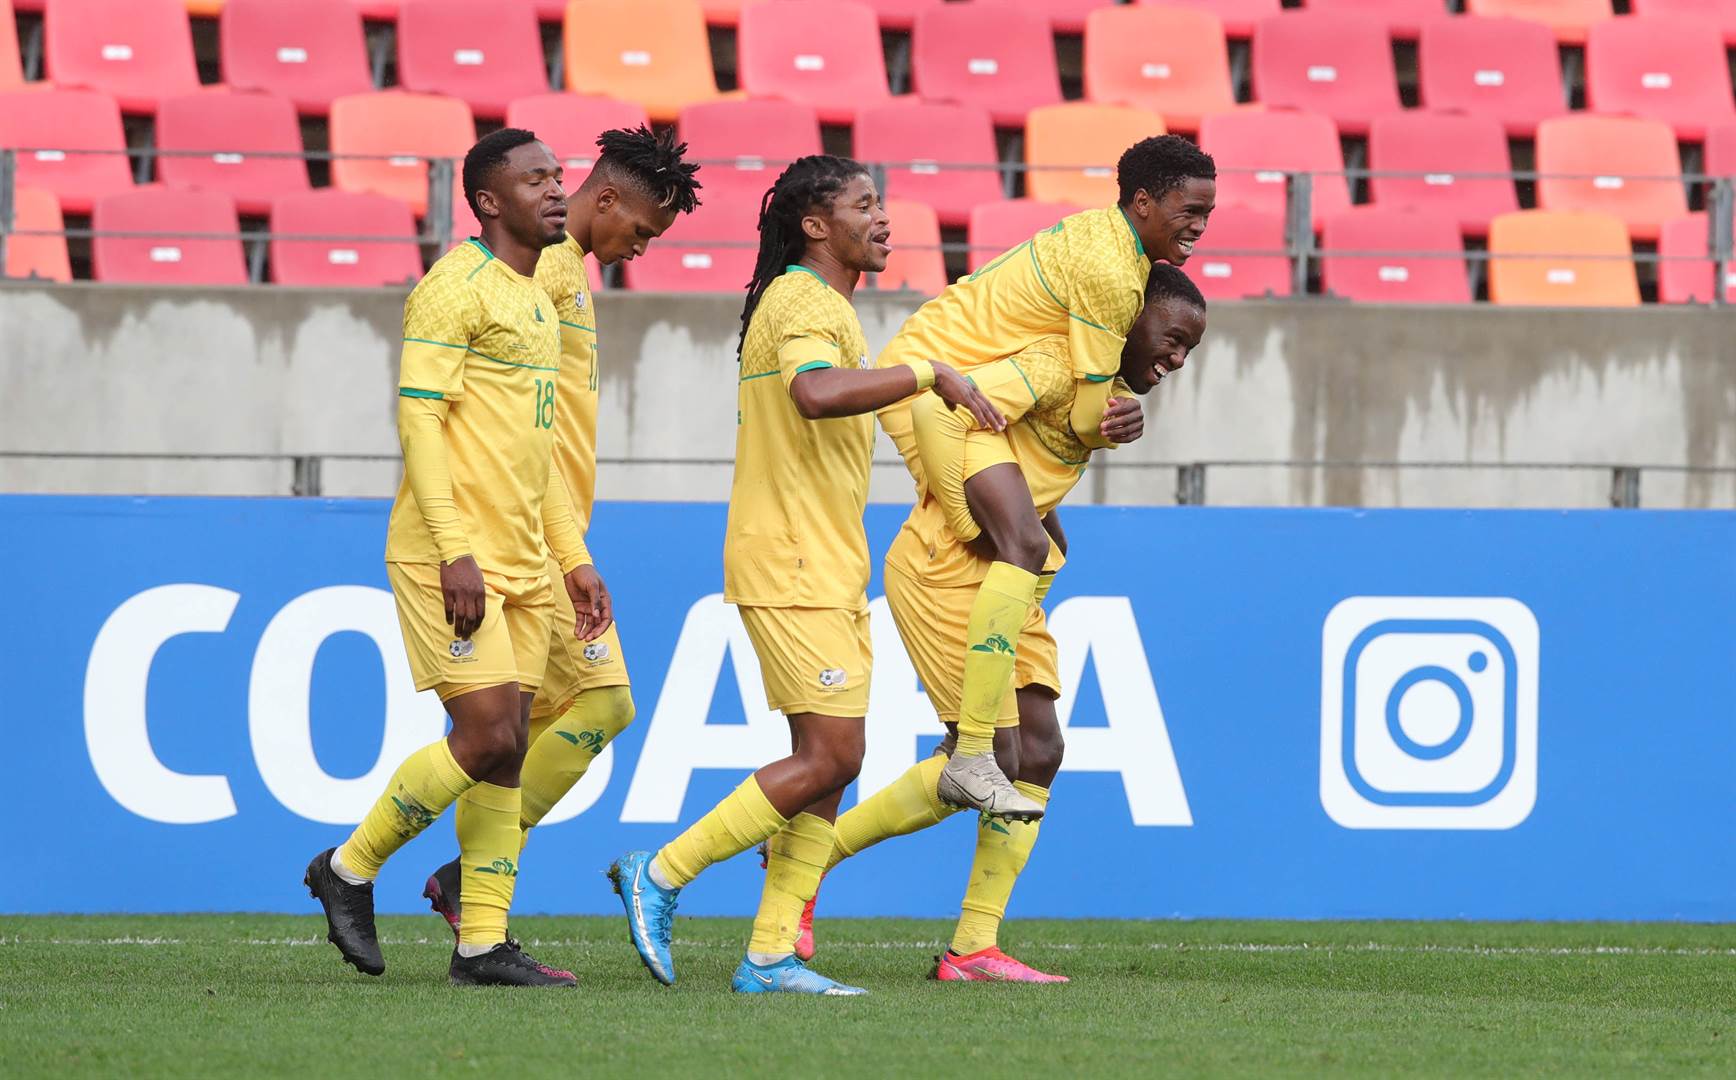 Most goals for South Africa at the COSAFA Cup (3) 